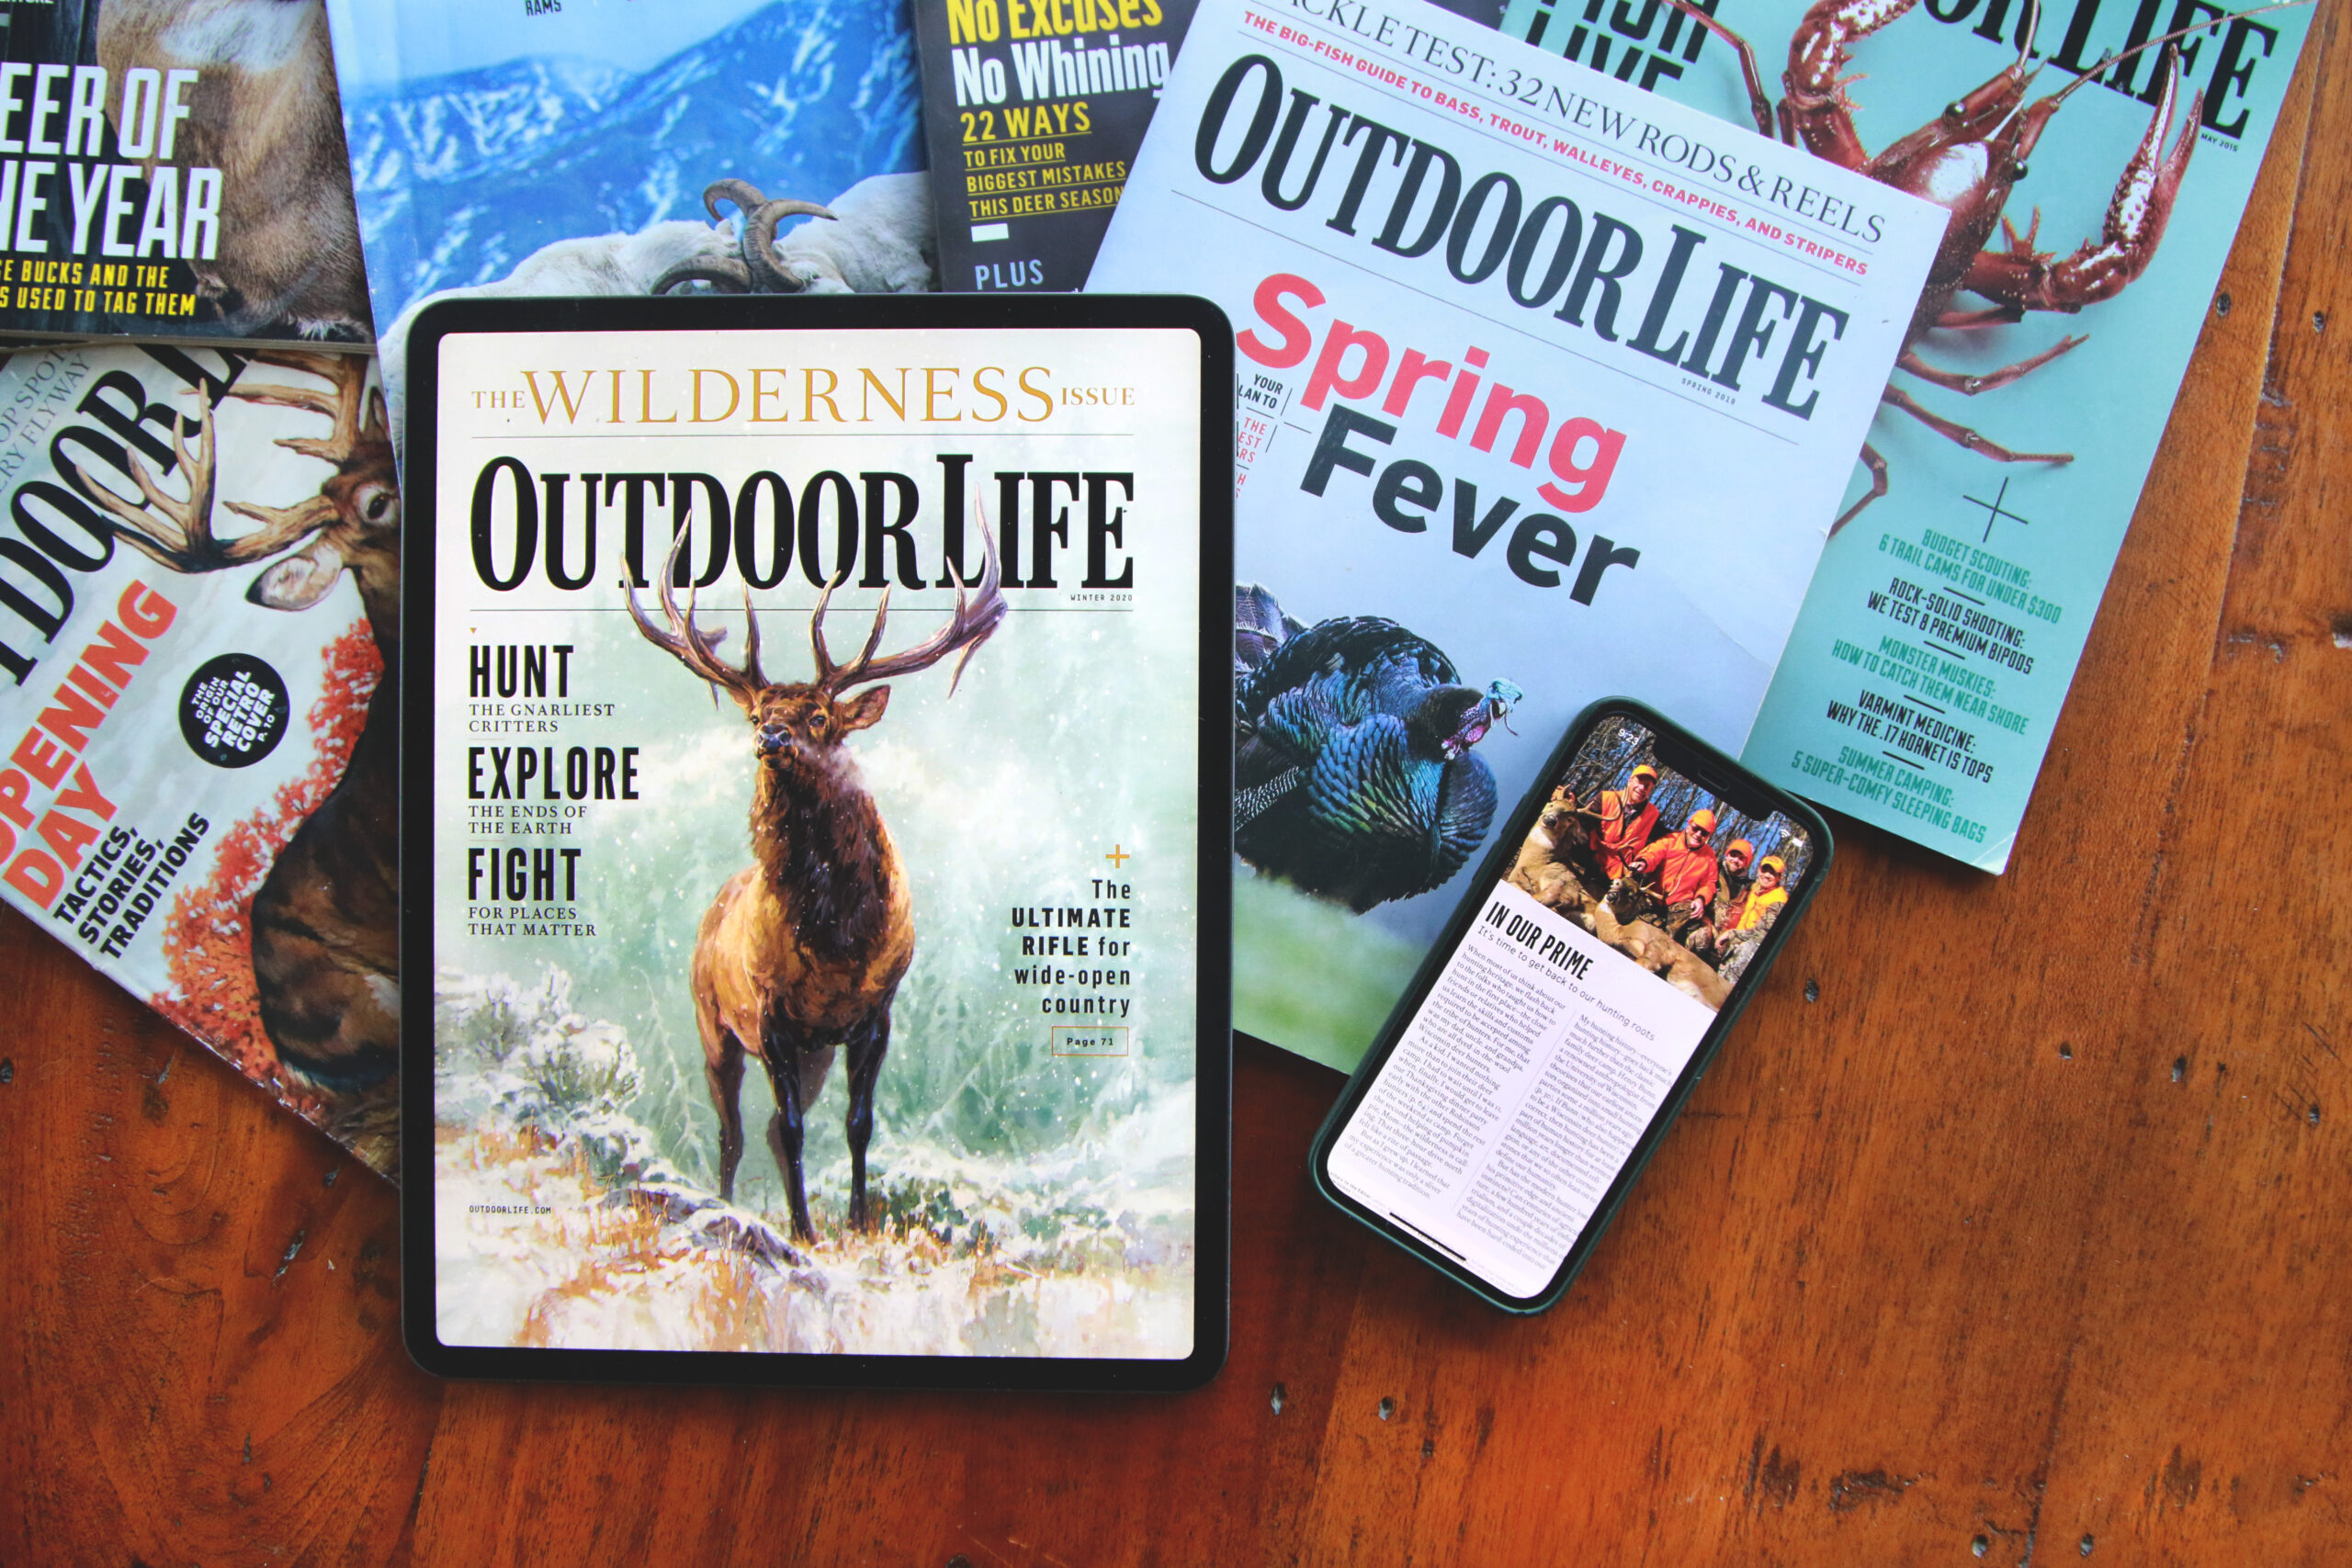 Outdoor Life digital editions on tablet and mobile.